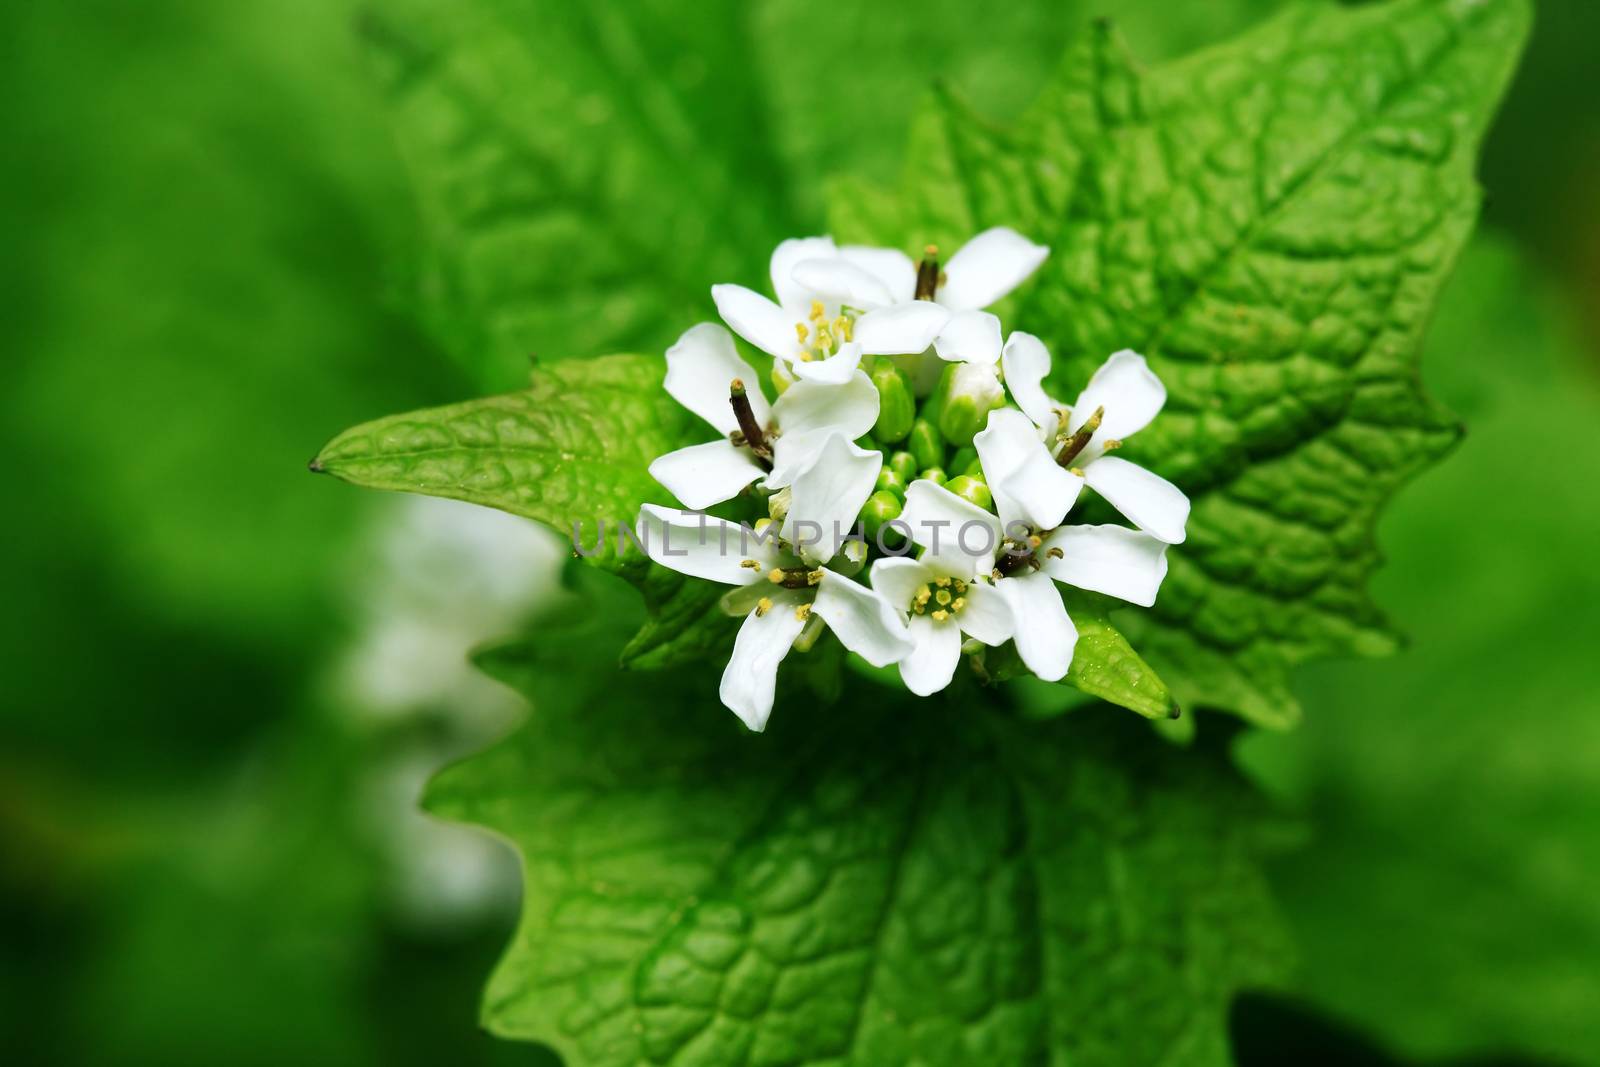 Nice small white flowers against green leaves background